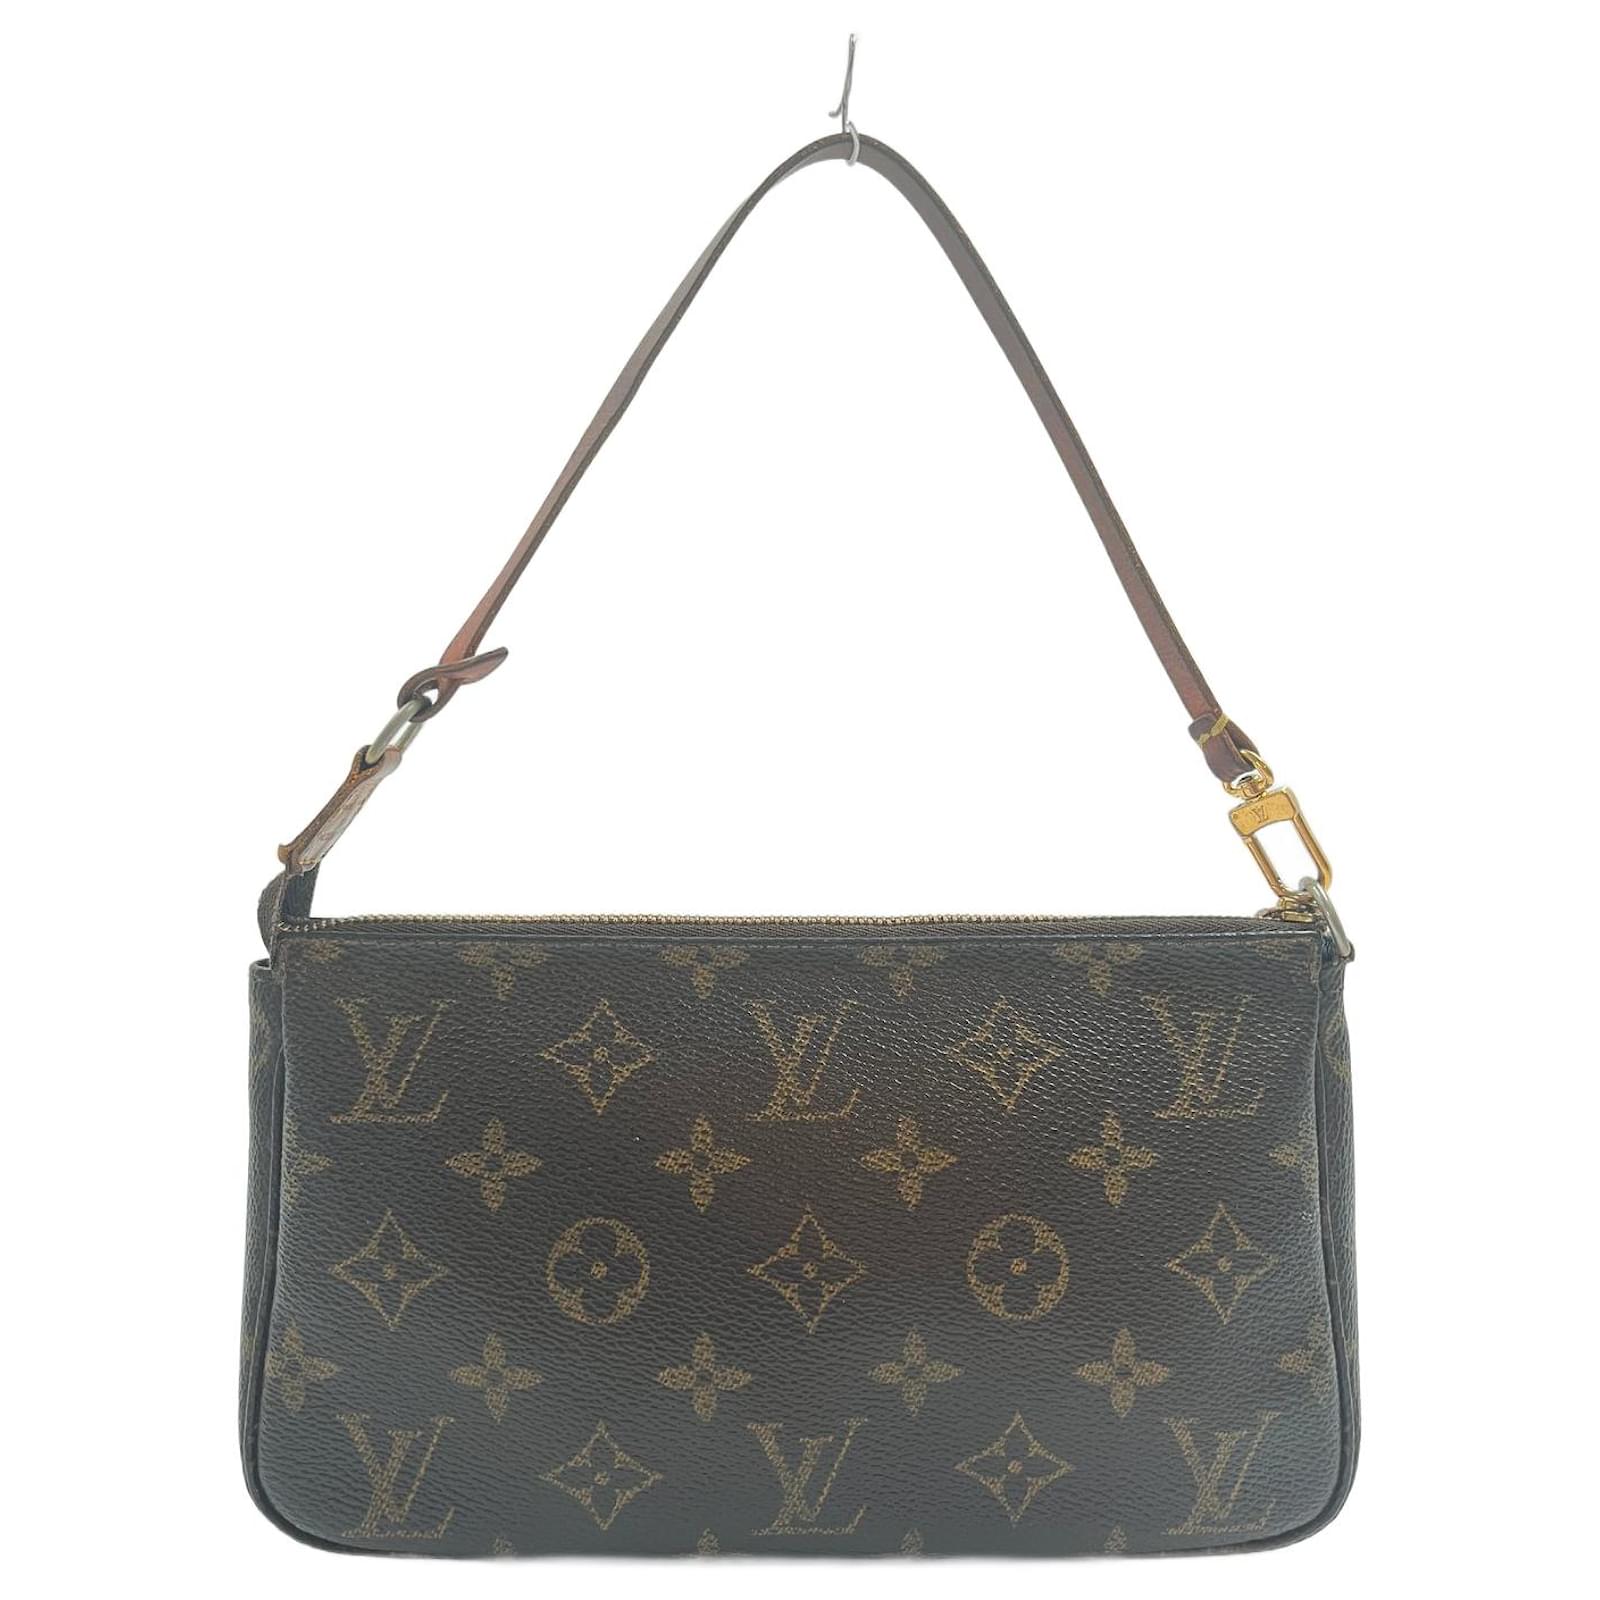 Louis Vuitton Pochette Accessories Monogram in Coated Canvas with